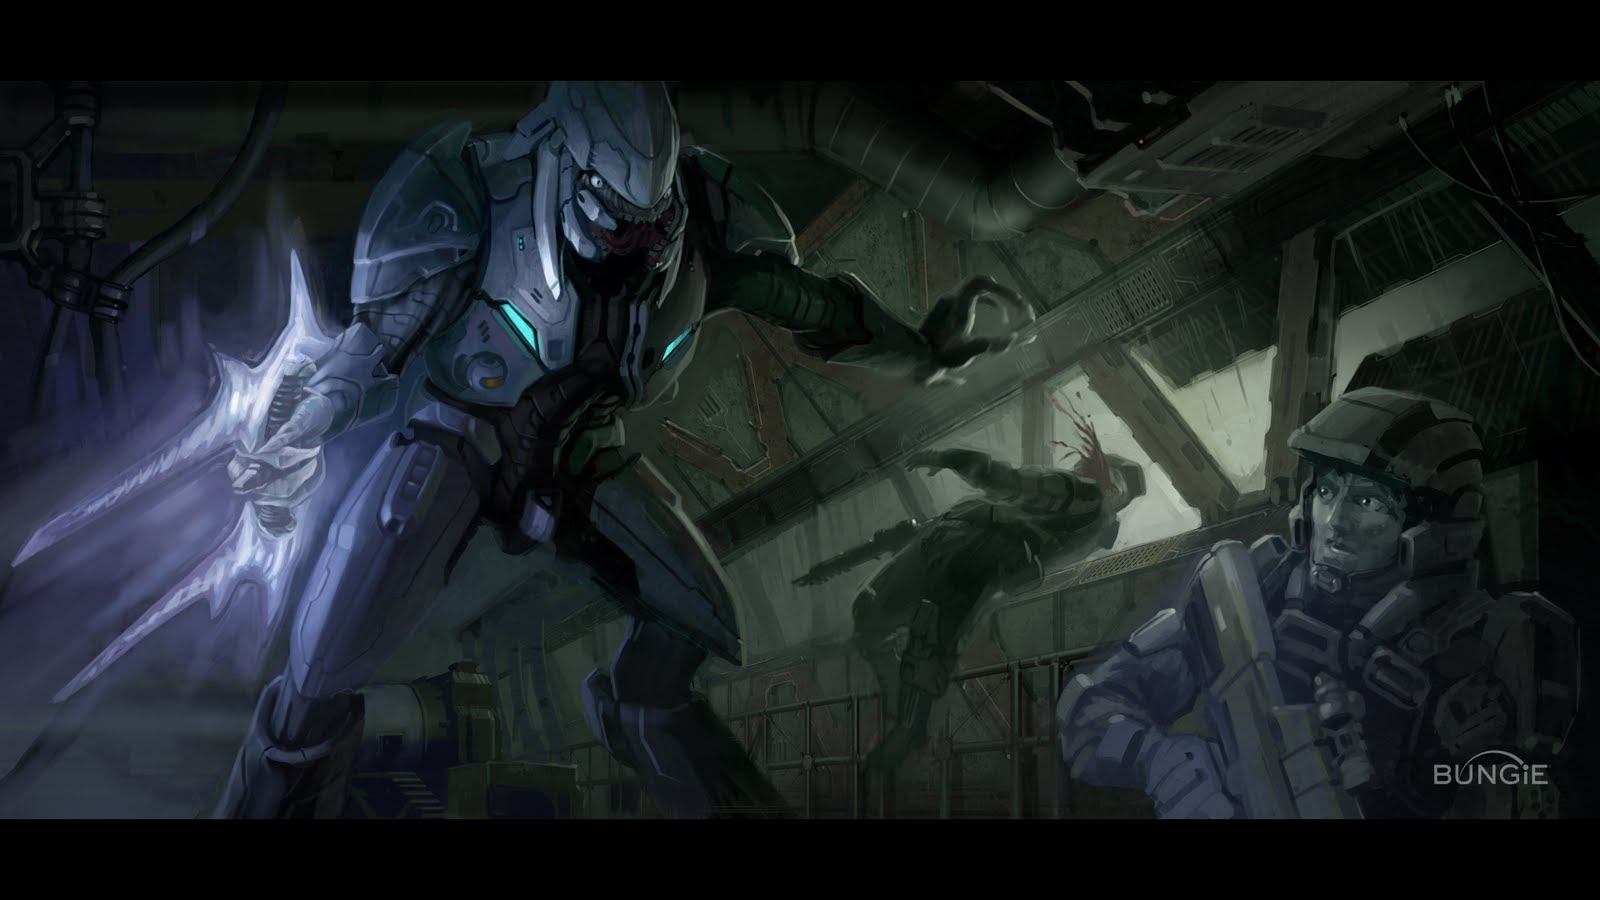 Gears of Halo More pictures of Halo Reach Concept Art